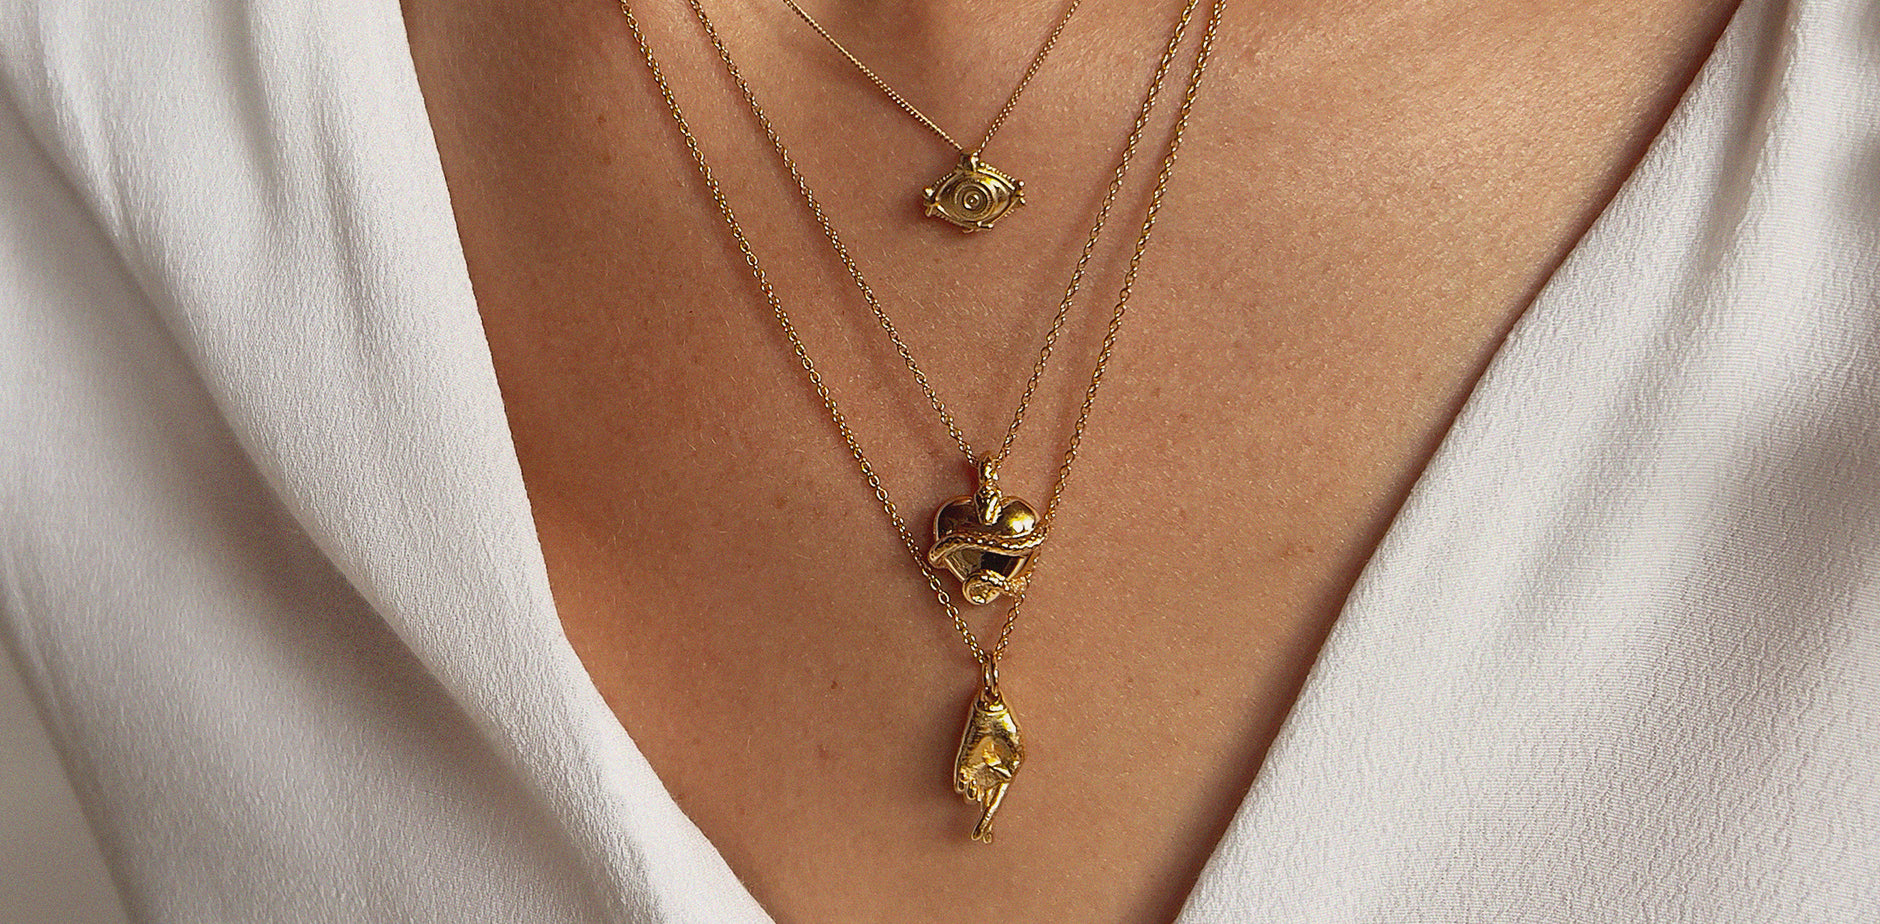 Fall Jewelry for women. Three gold charm necklaces on a model wearing a white shirt. The charms are fingers crossed for good luck, and eye for protection, and a snake wrapped around a heart for wisdom.